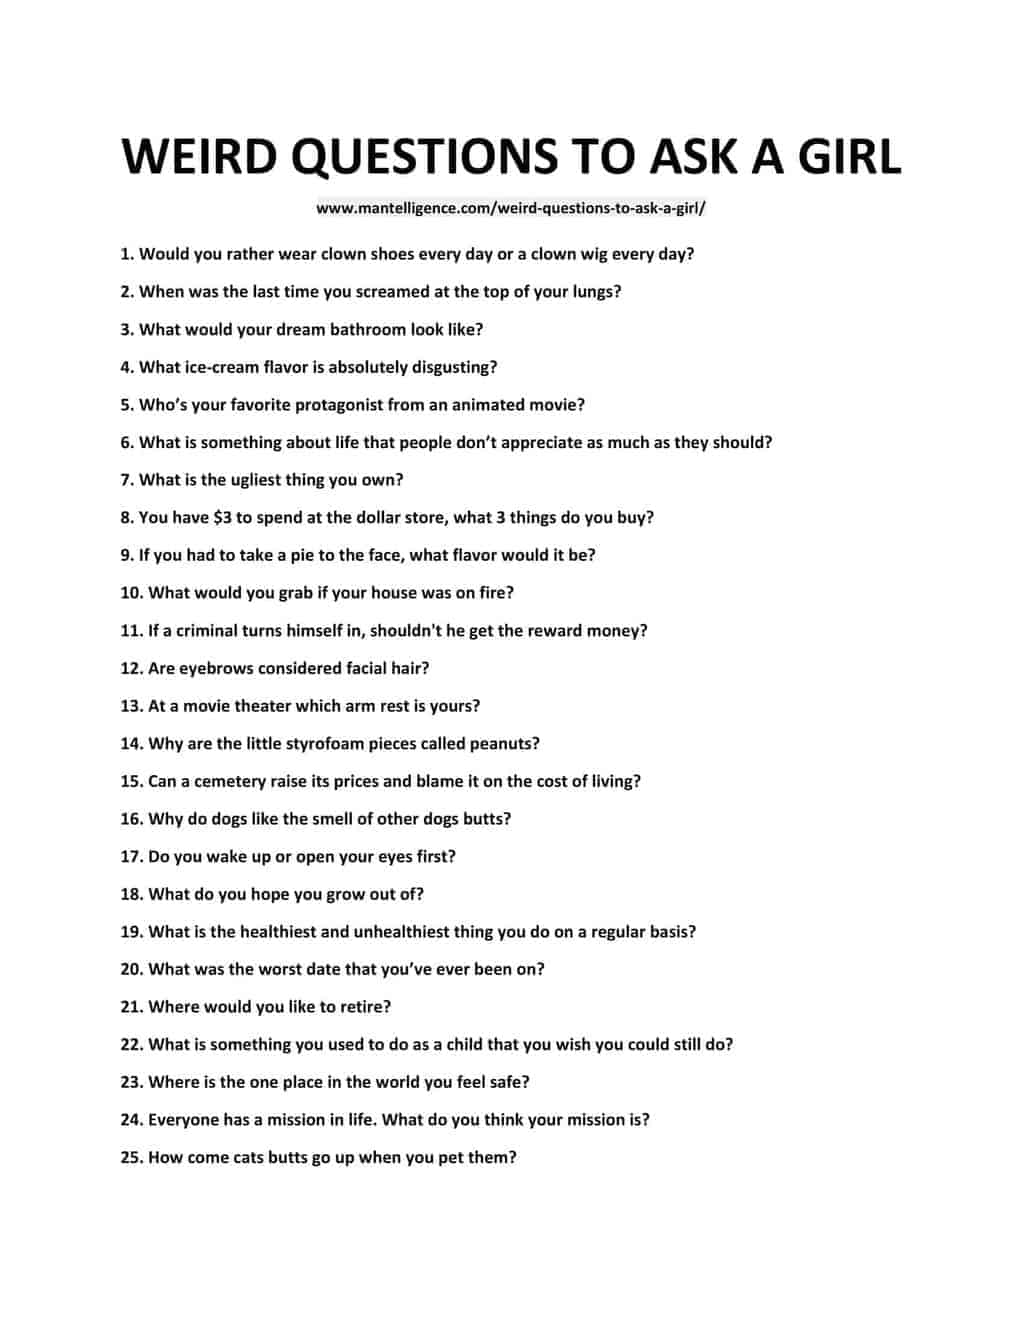 WEIRD QUESTIONS TO ASK A GIRL 1 